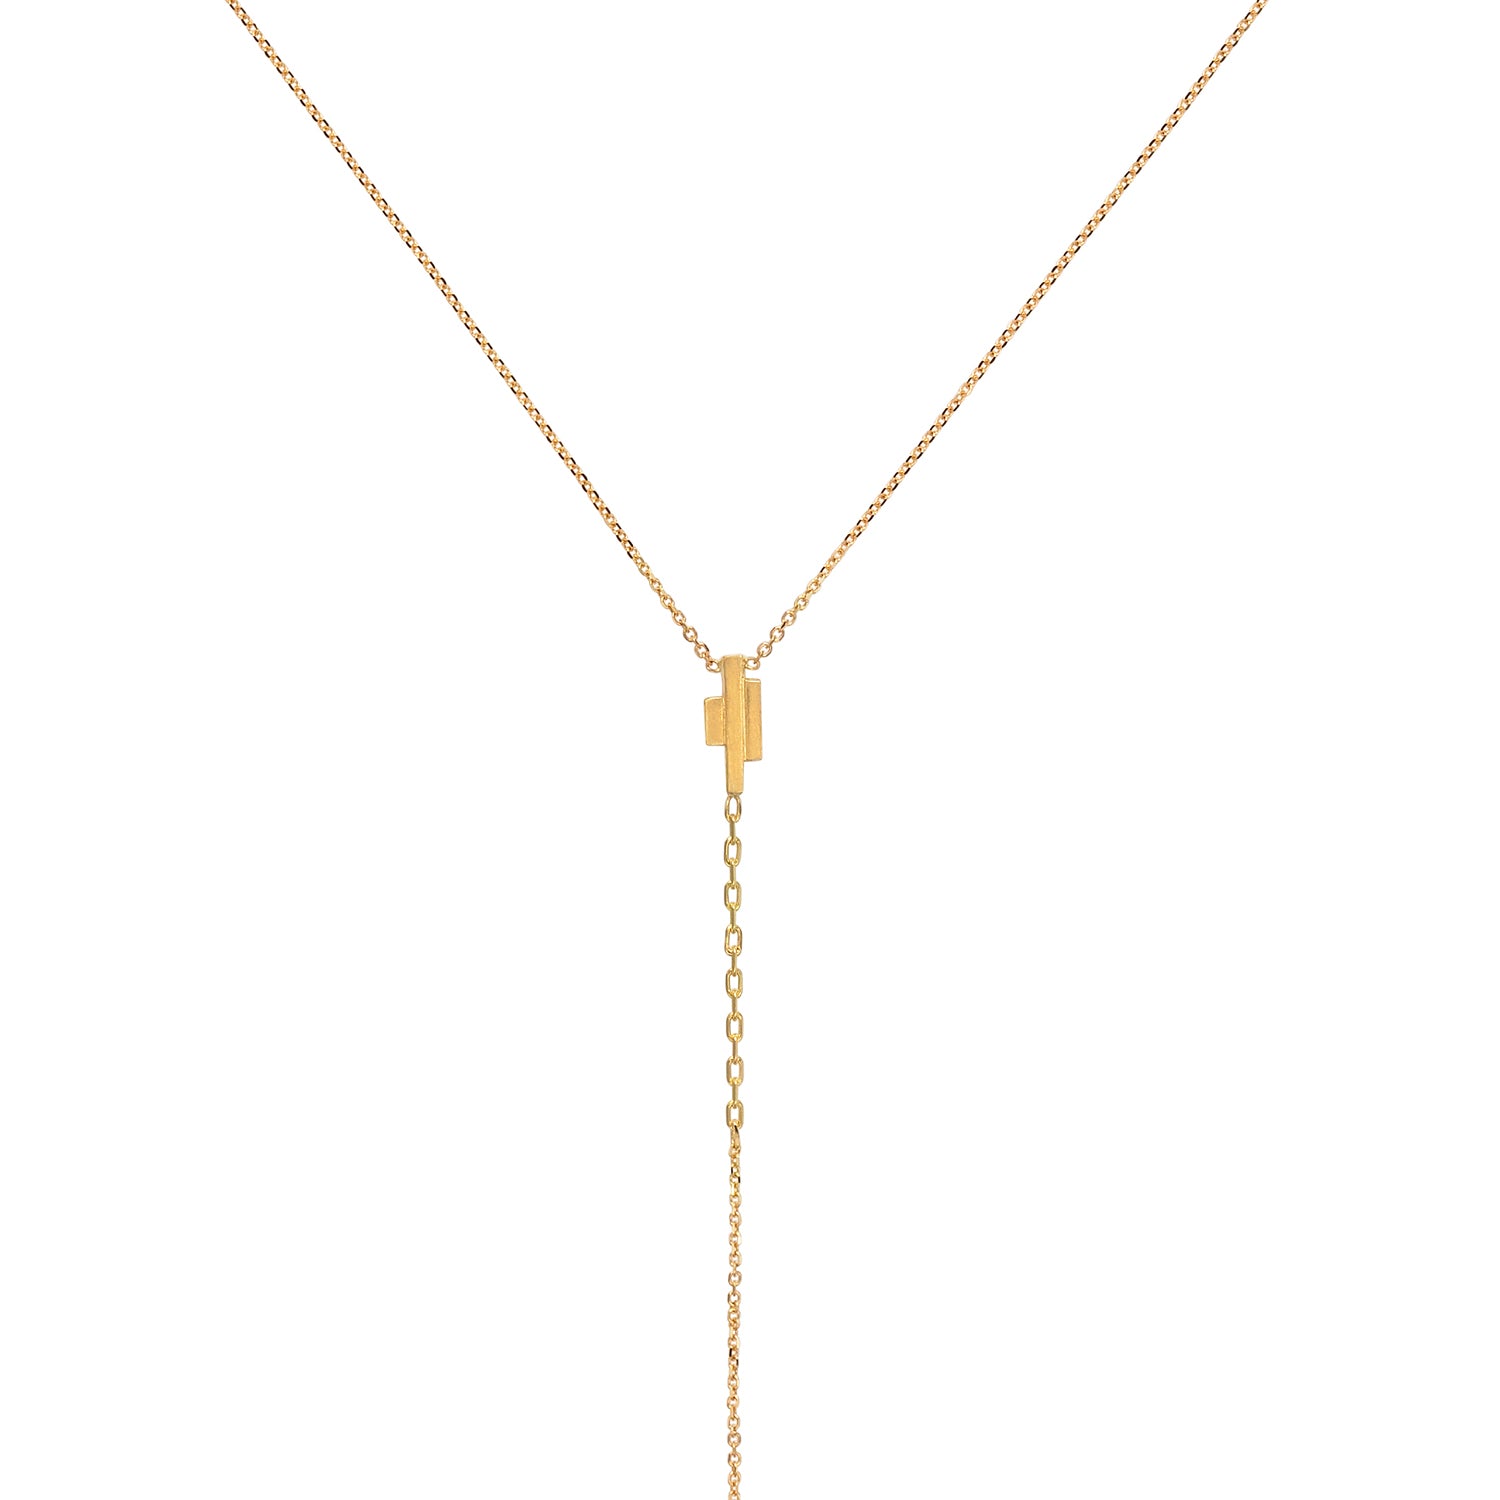 18CT DECO DECADENCE LARIAT STYLE BAR NECKLACE